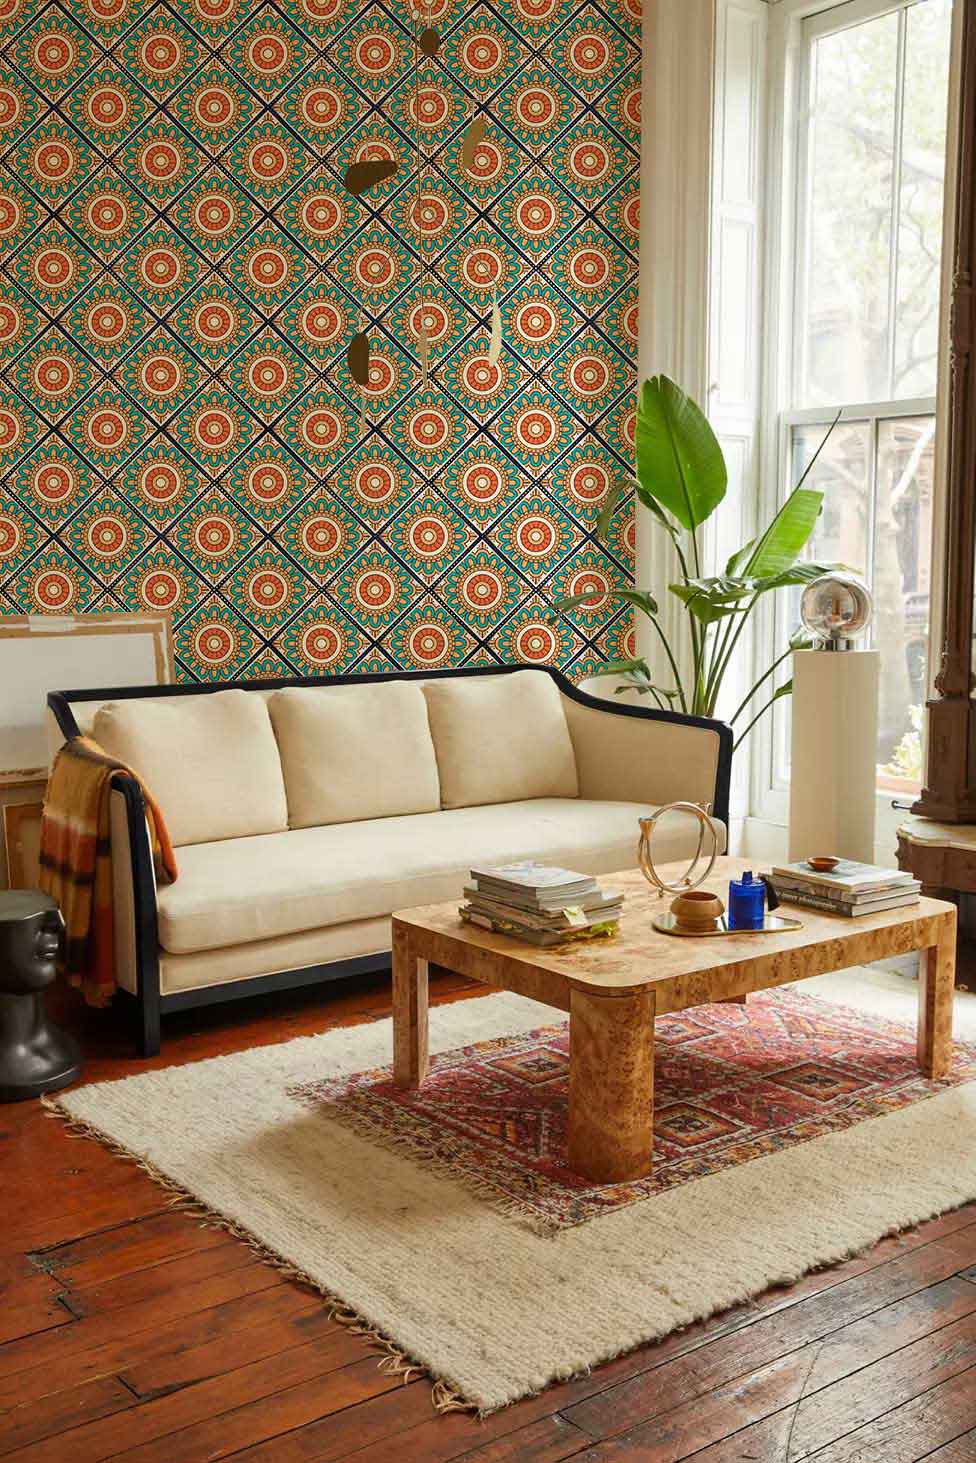 mural with repeating patterns of green and orange in a living room